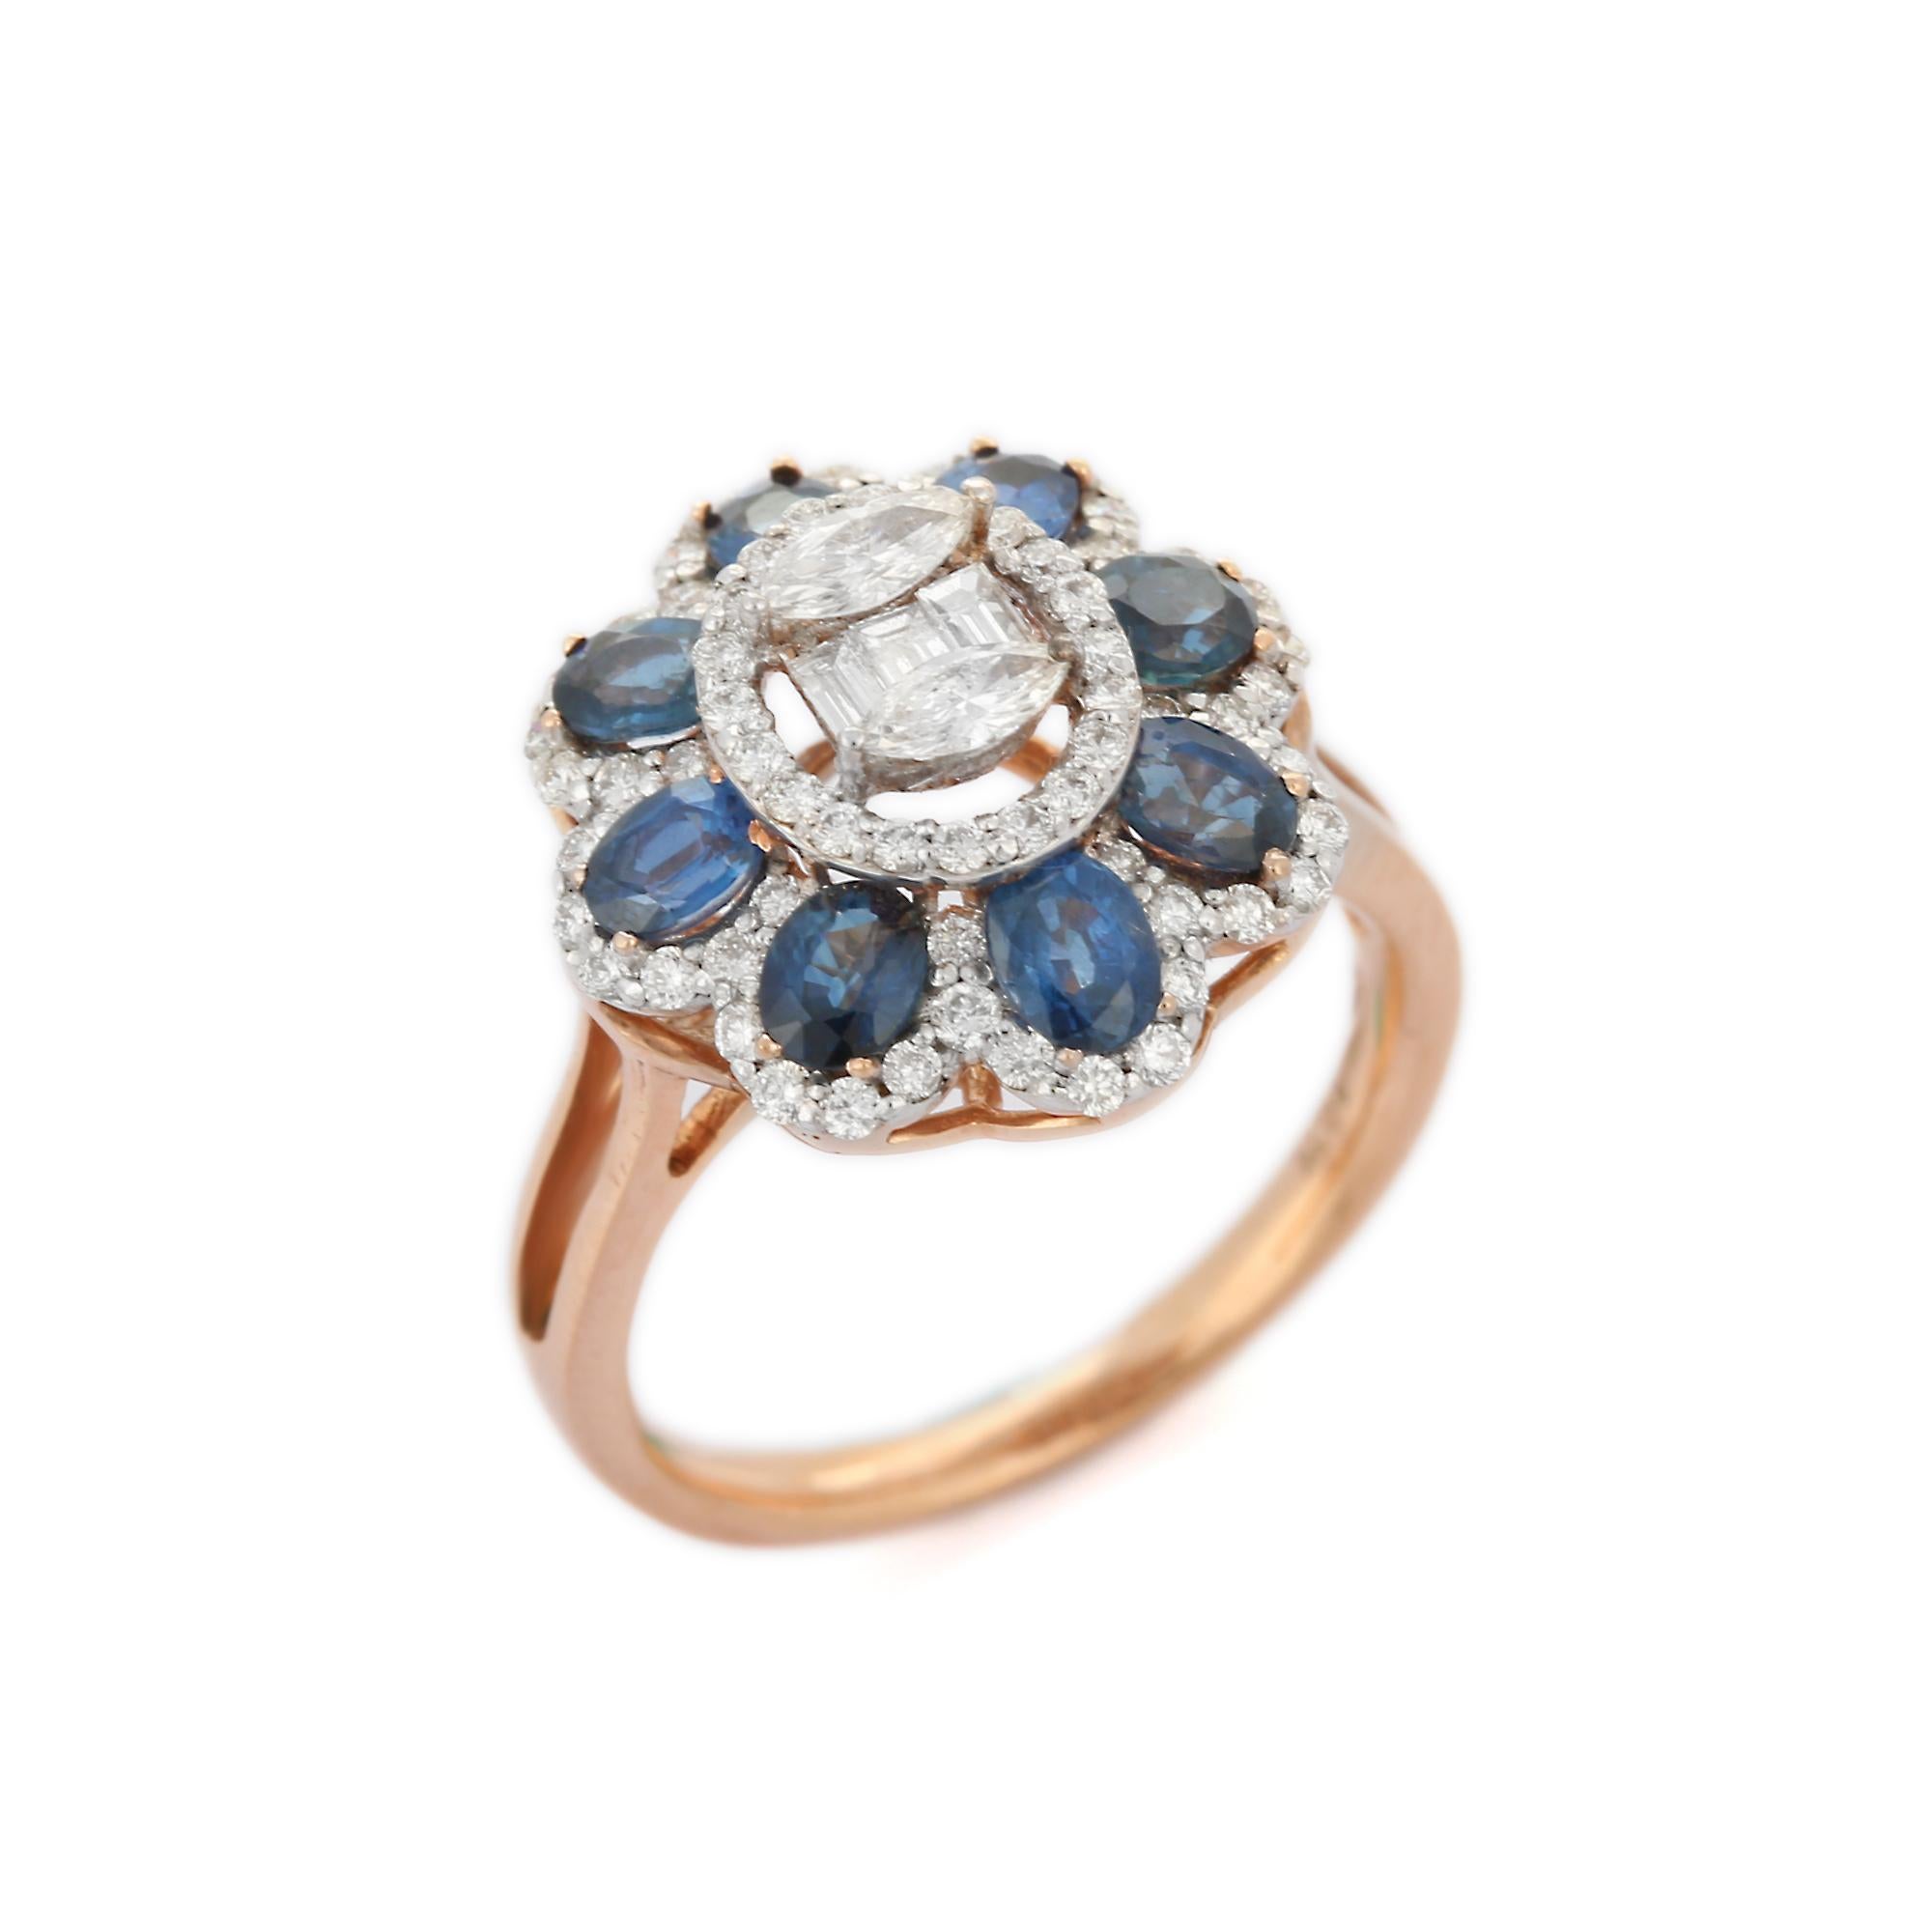 For Sale:  18K Solid Rose Gold 1.76 ct Sapphire Diamond Big Flower Wedding Ring 2